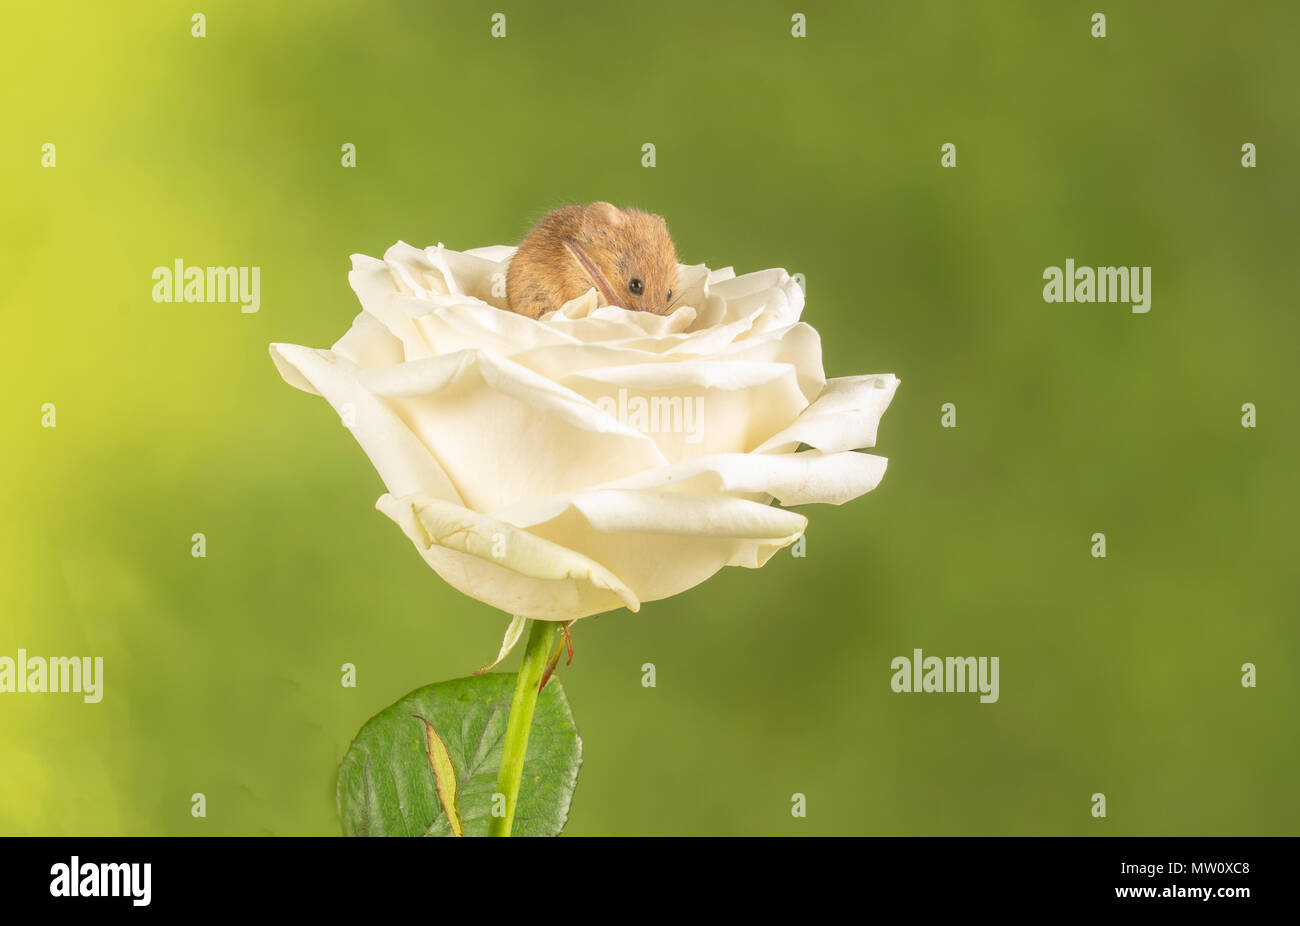 havest mouse on a white rose in a studio background Stock Photo